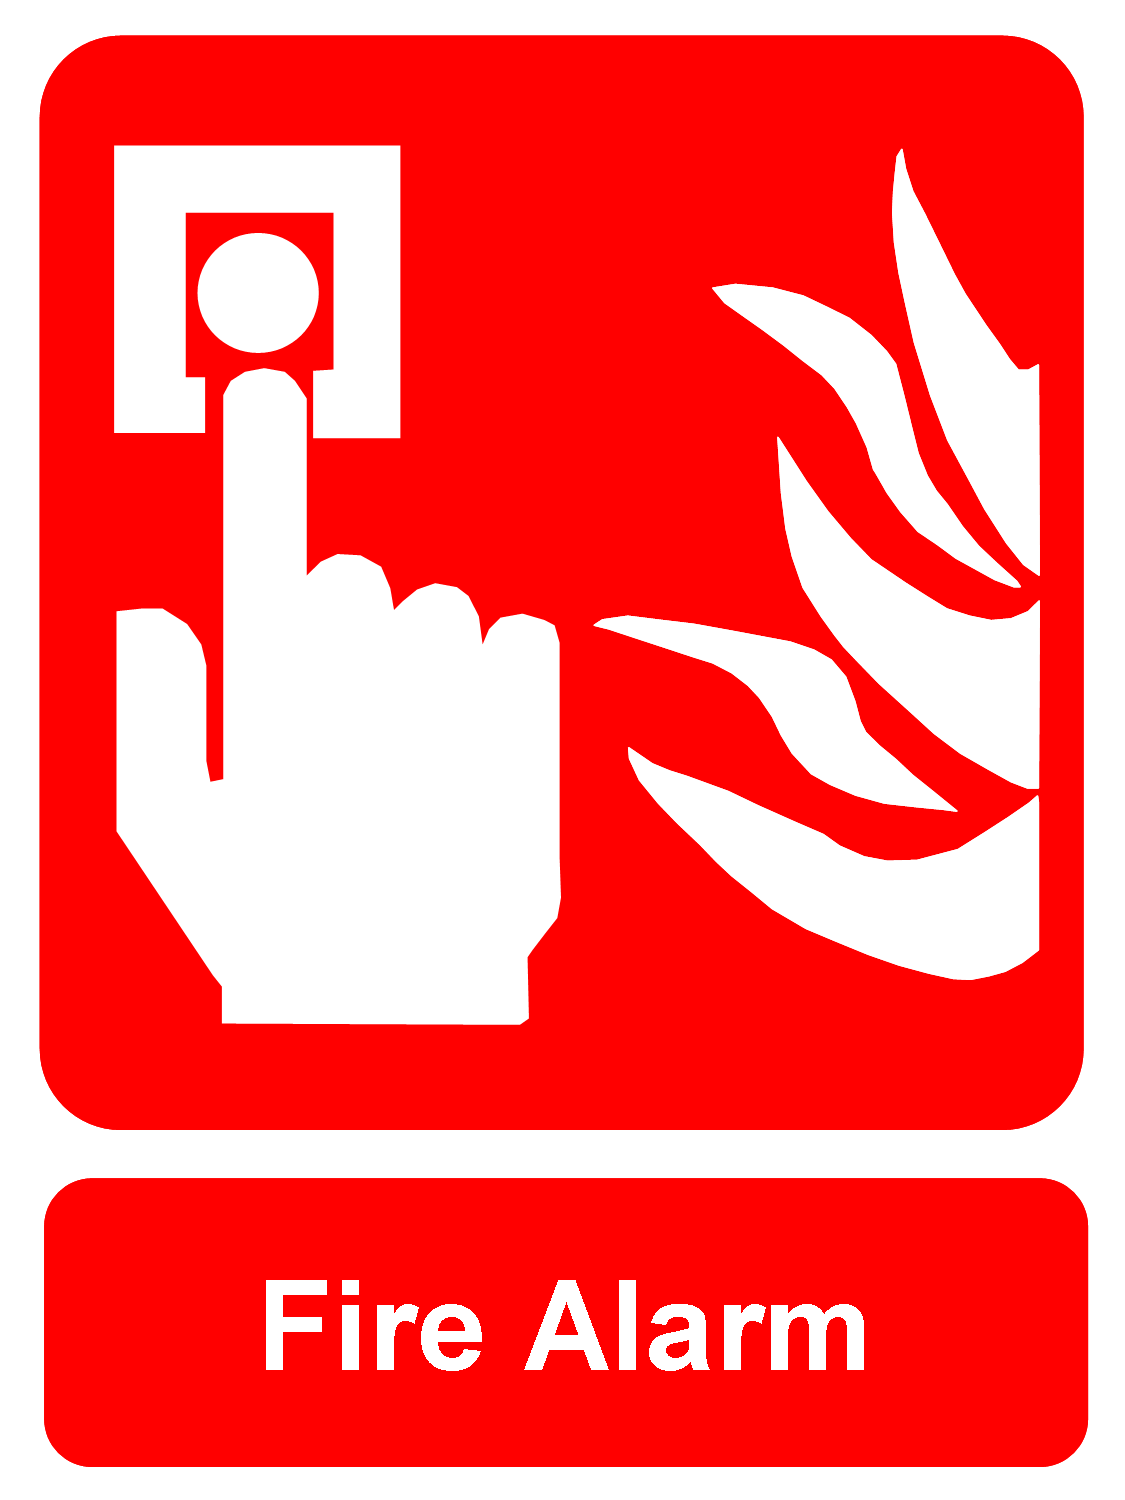 Fire Safety Signs & Posters - Download free safety signs & posters